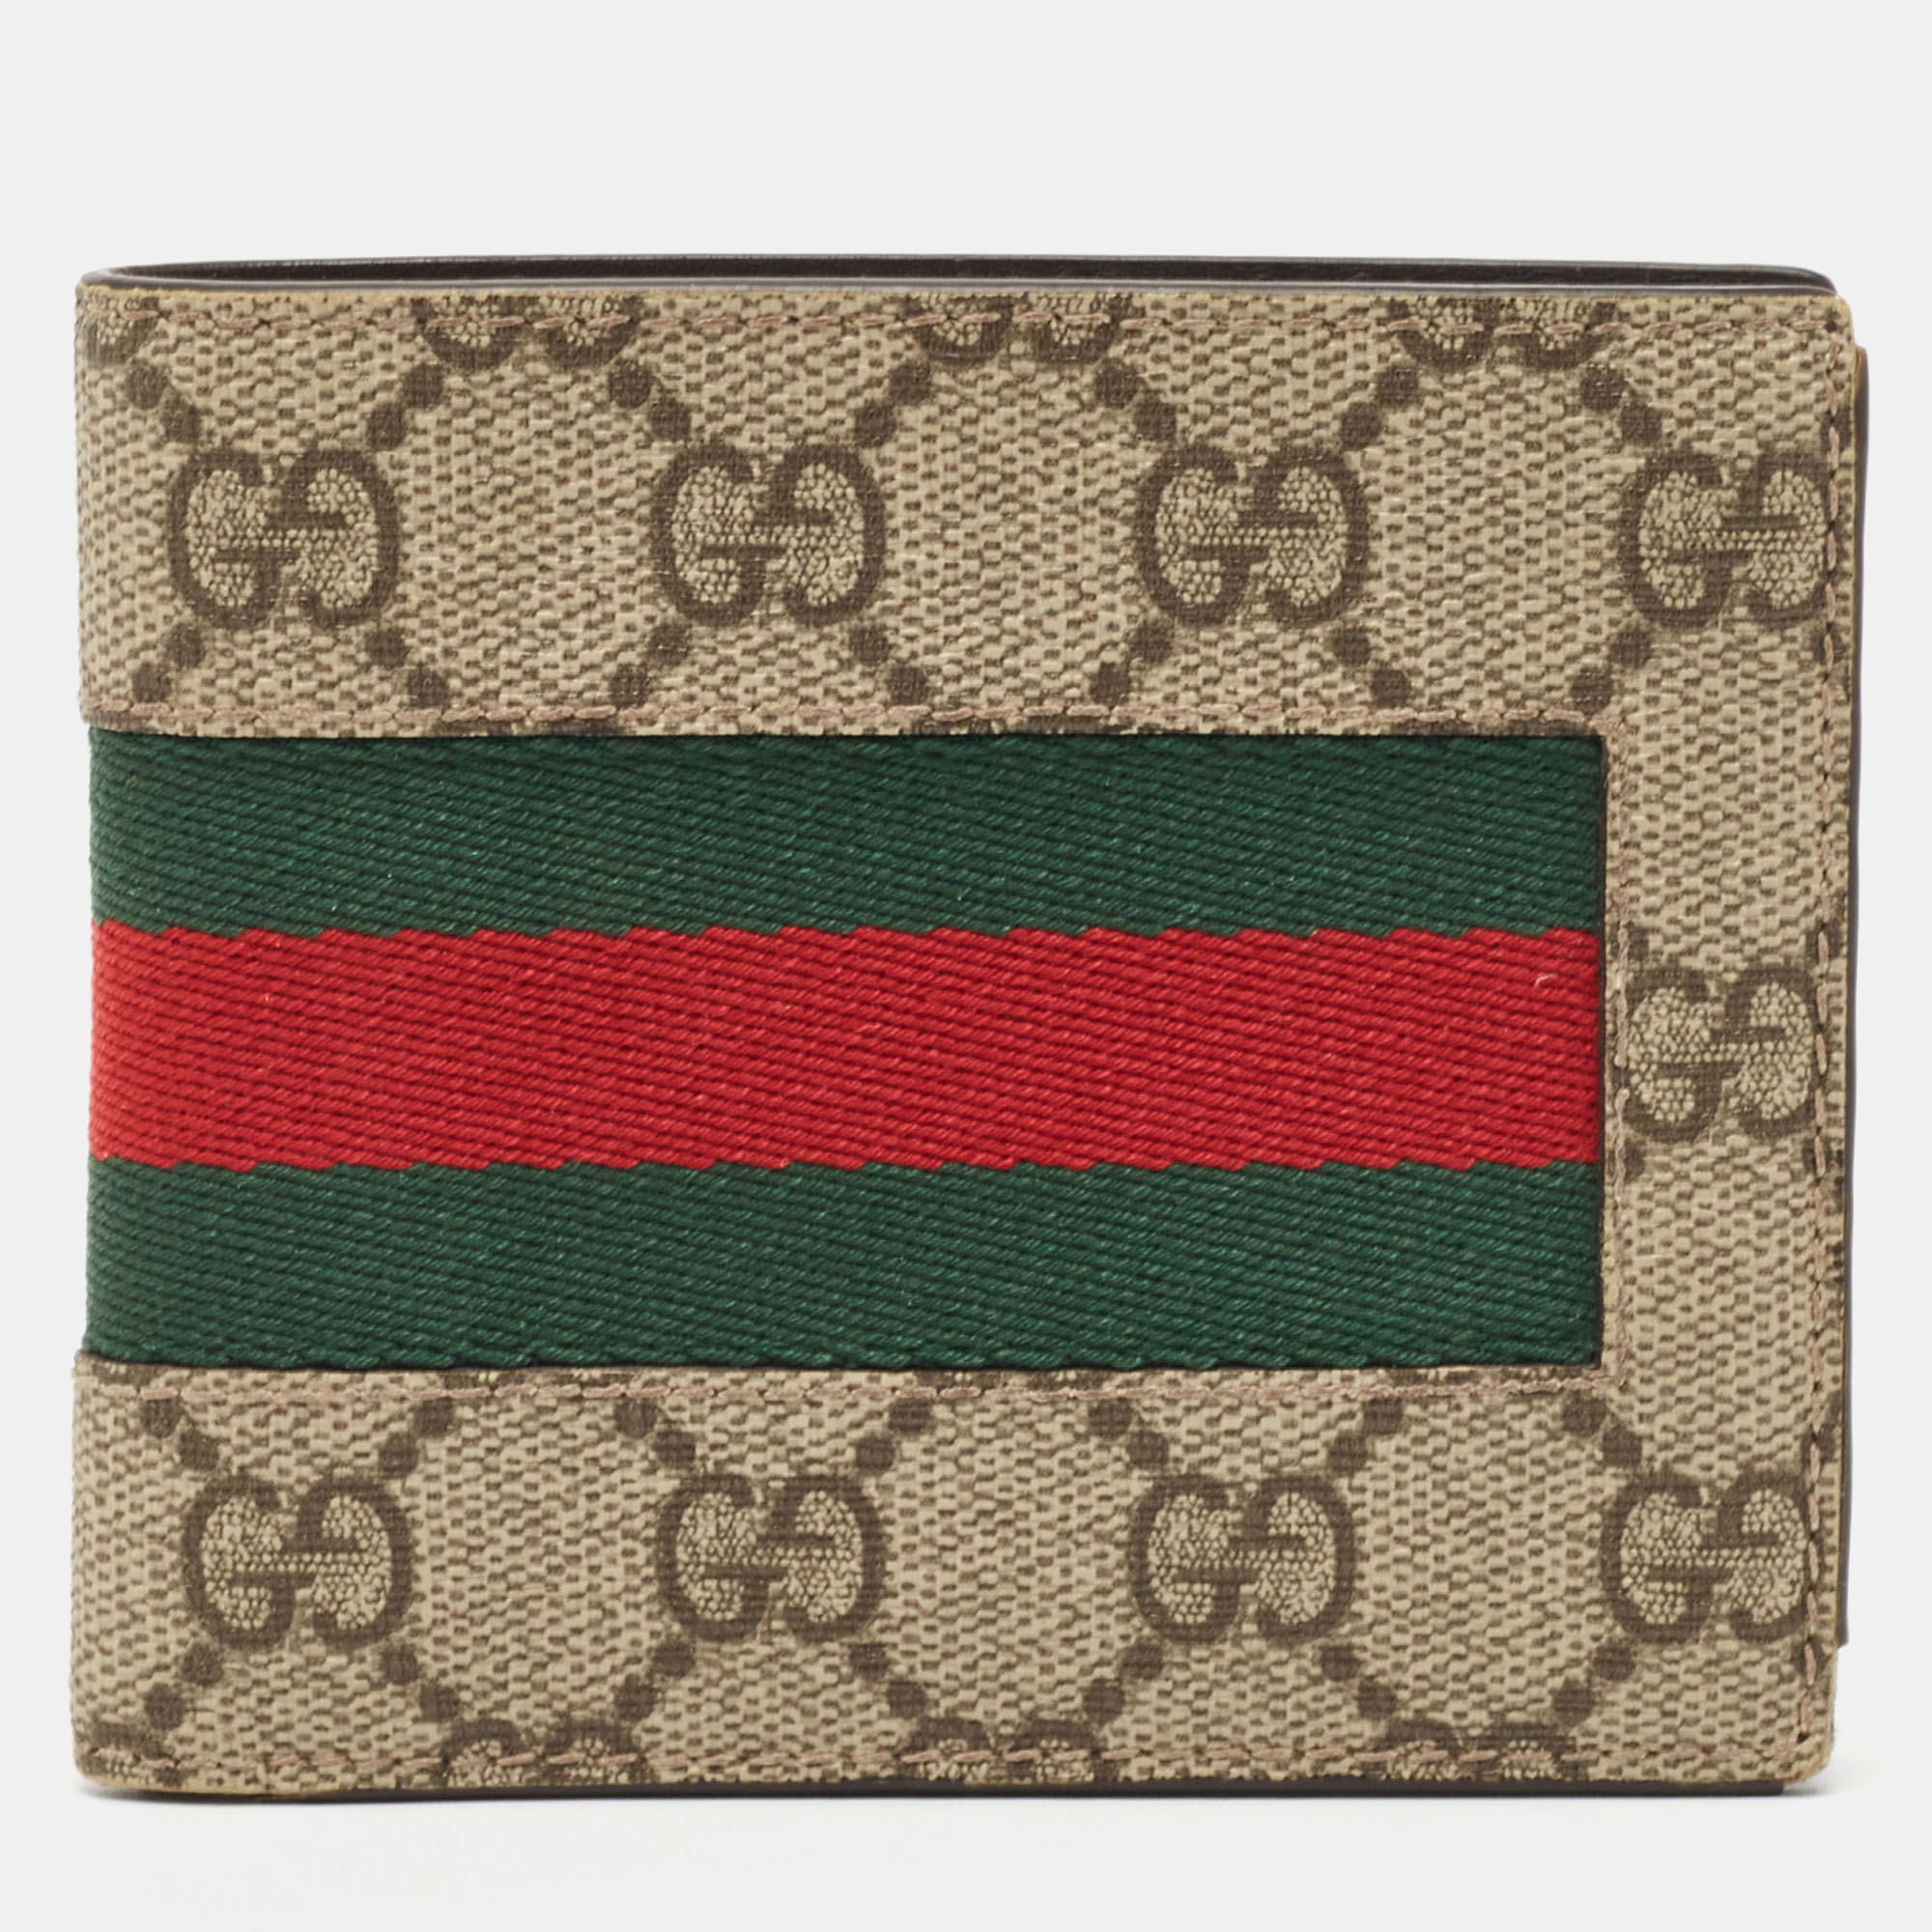 Pre-owned Gucci Beige Gg Supreme Canvas Web Bifold Compact Wallet